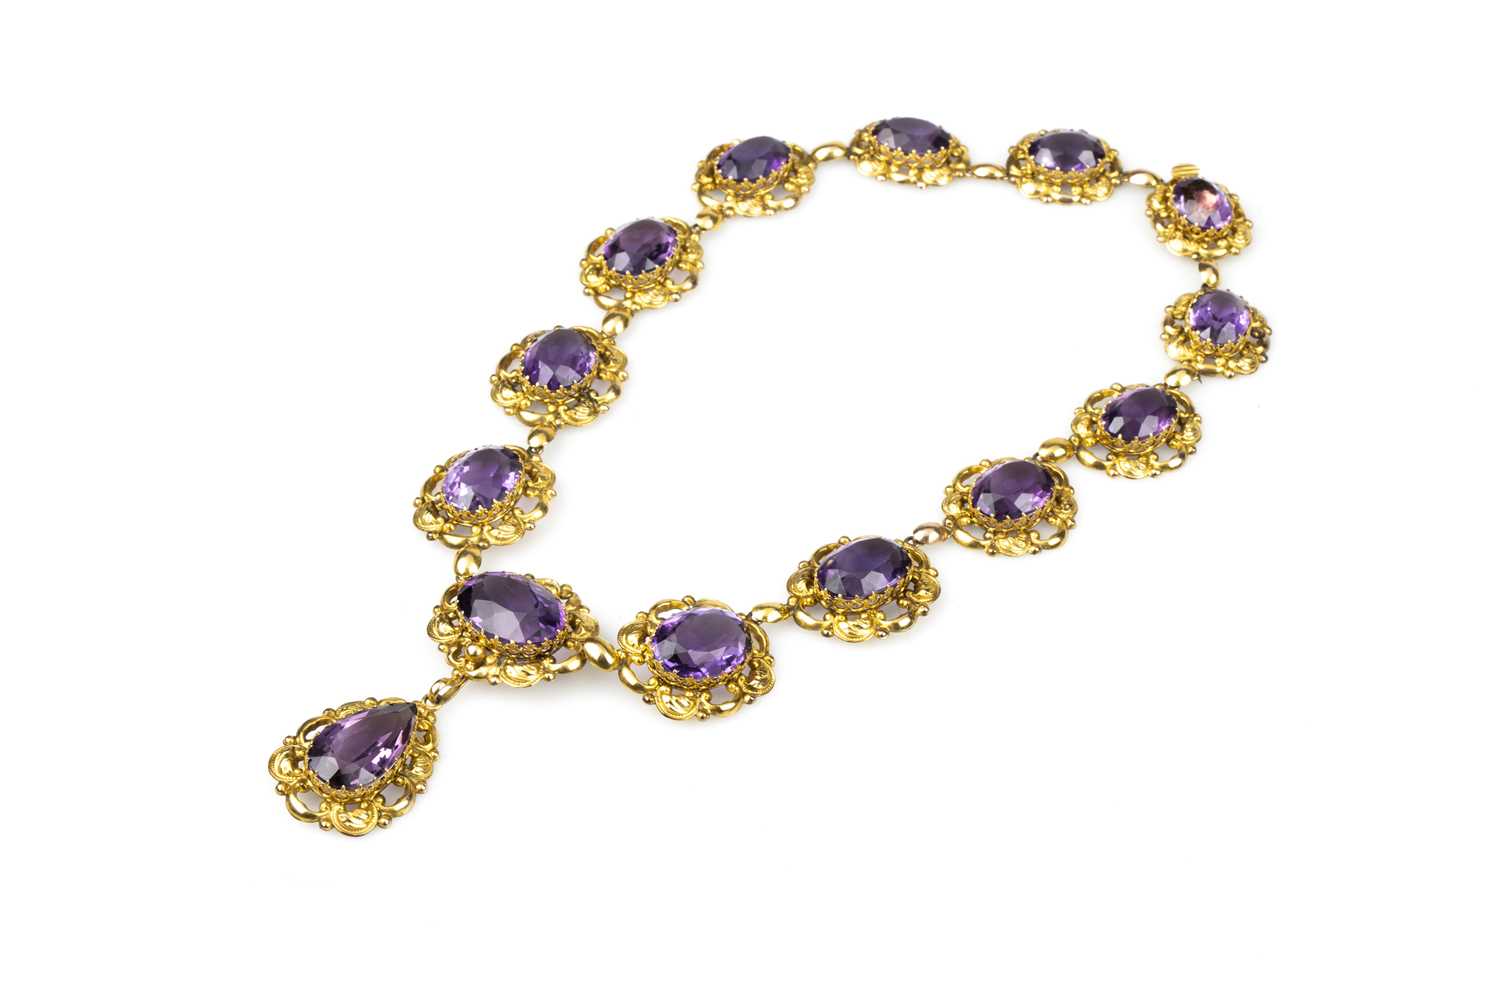 Lot 131 - A Mid-Victorian Amethyst Riviére Necklace